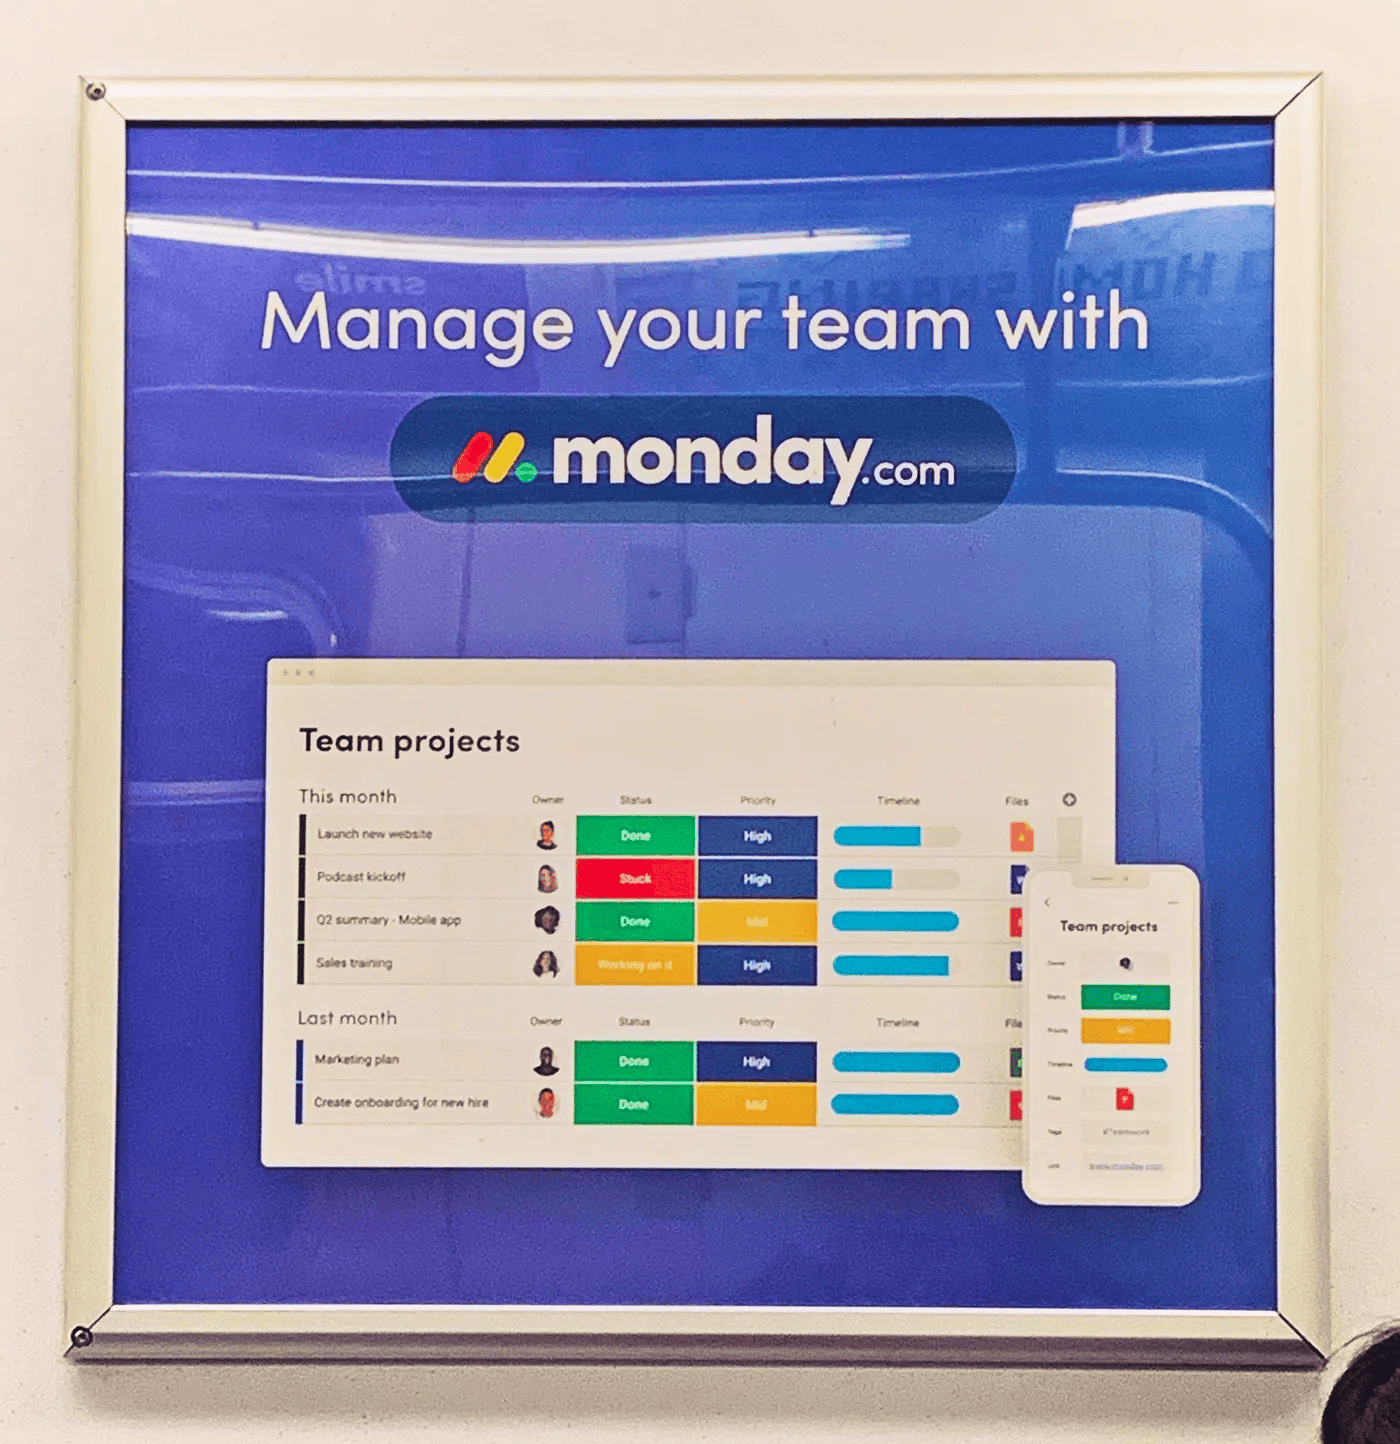 "Manage your team with monday.com" ad on a subway